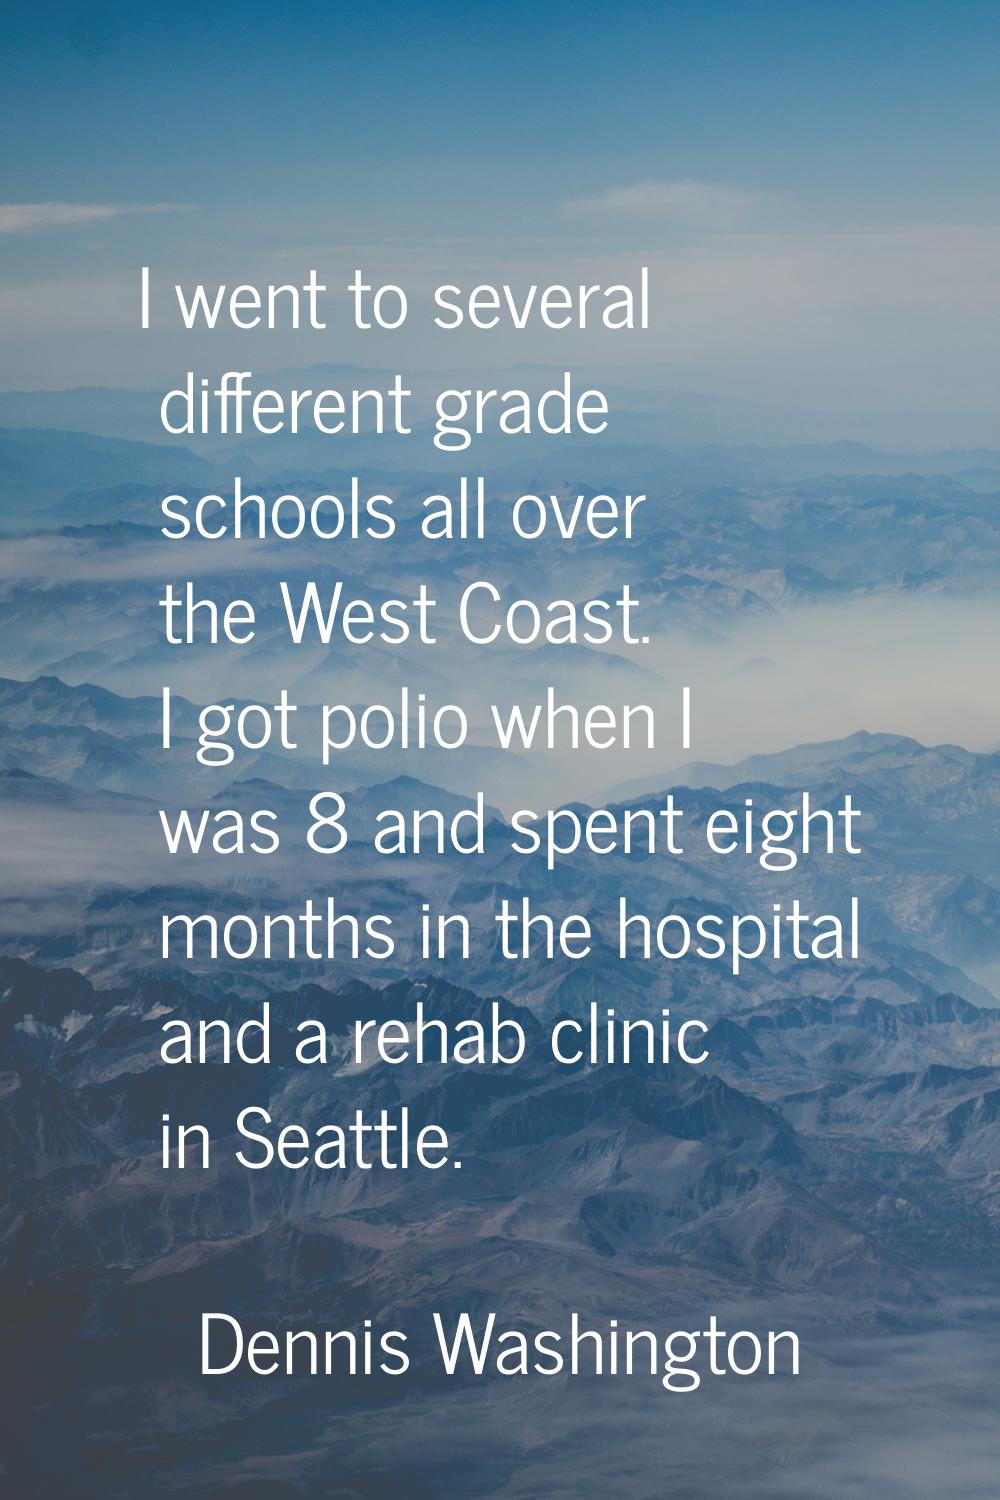 I went to several different grade schools all over the West Coast. I got polio when I was 8 and spe